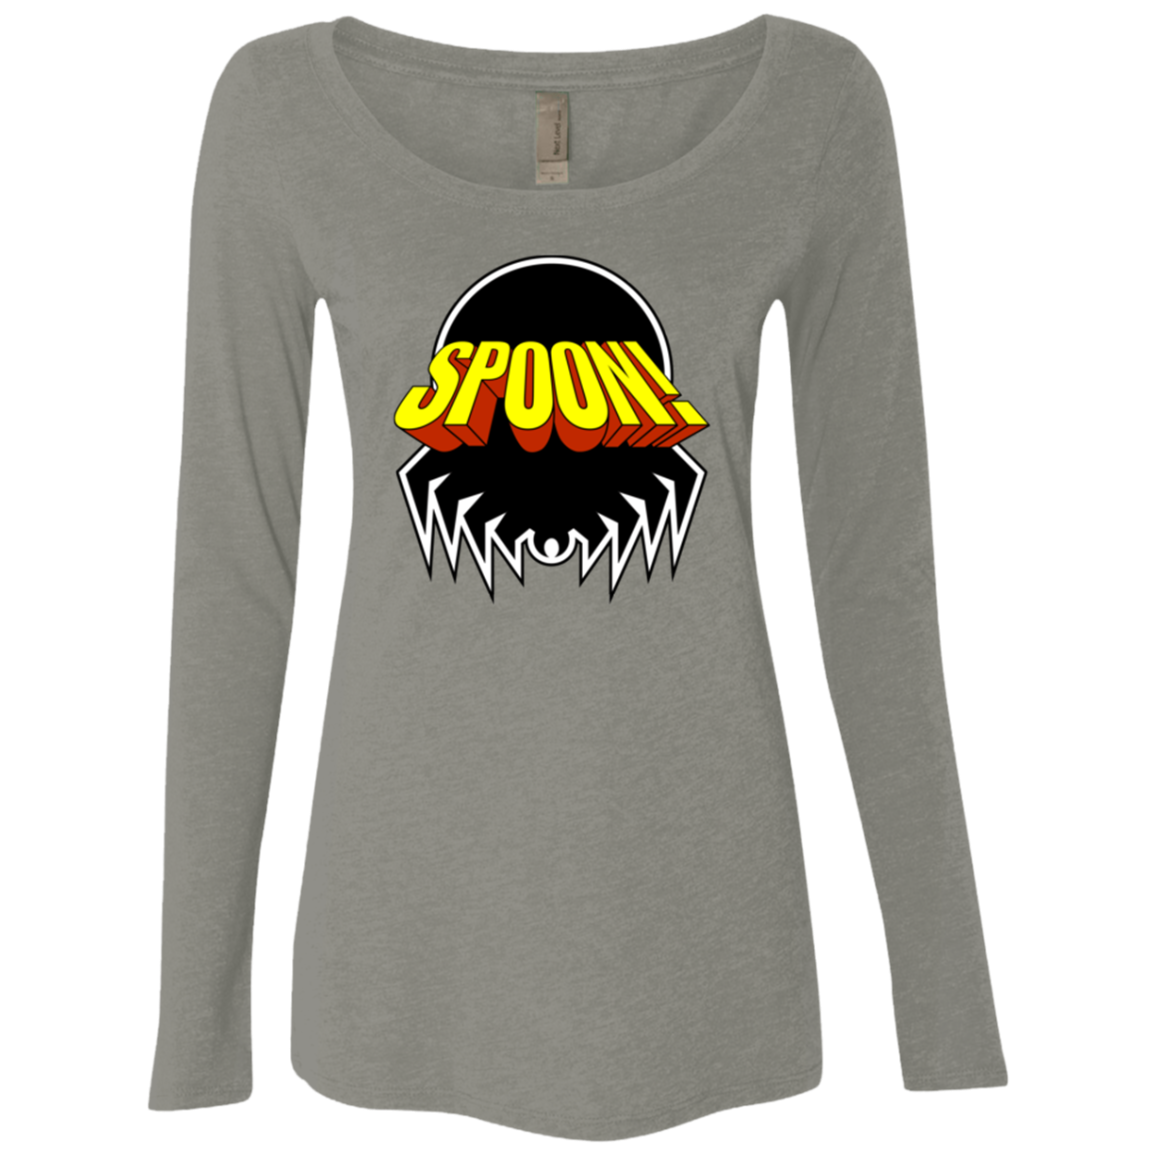 Honk If You Love Justice! Women's Triblend Long Sleeve Shirt